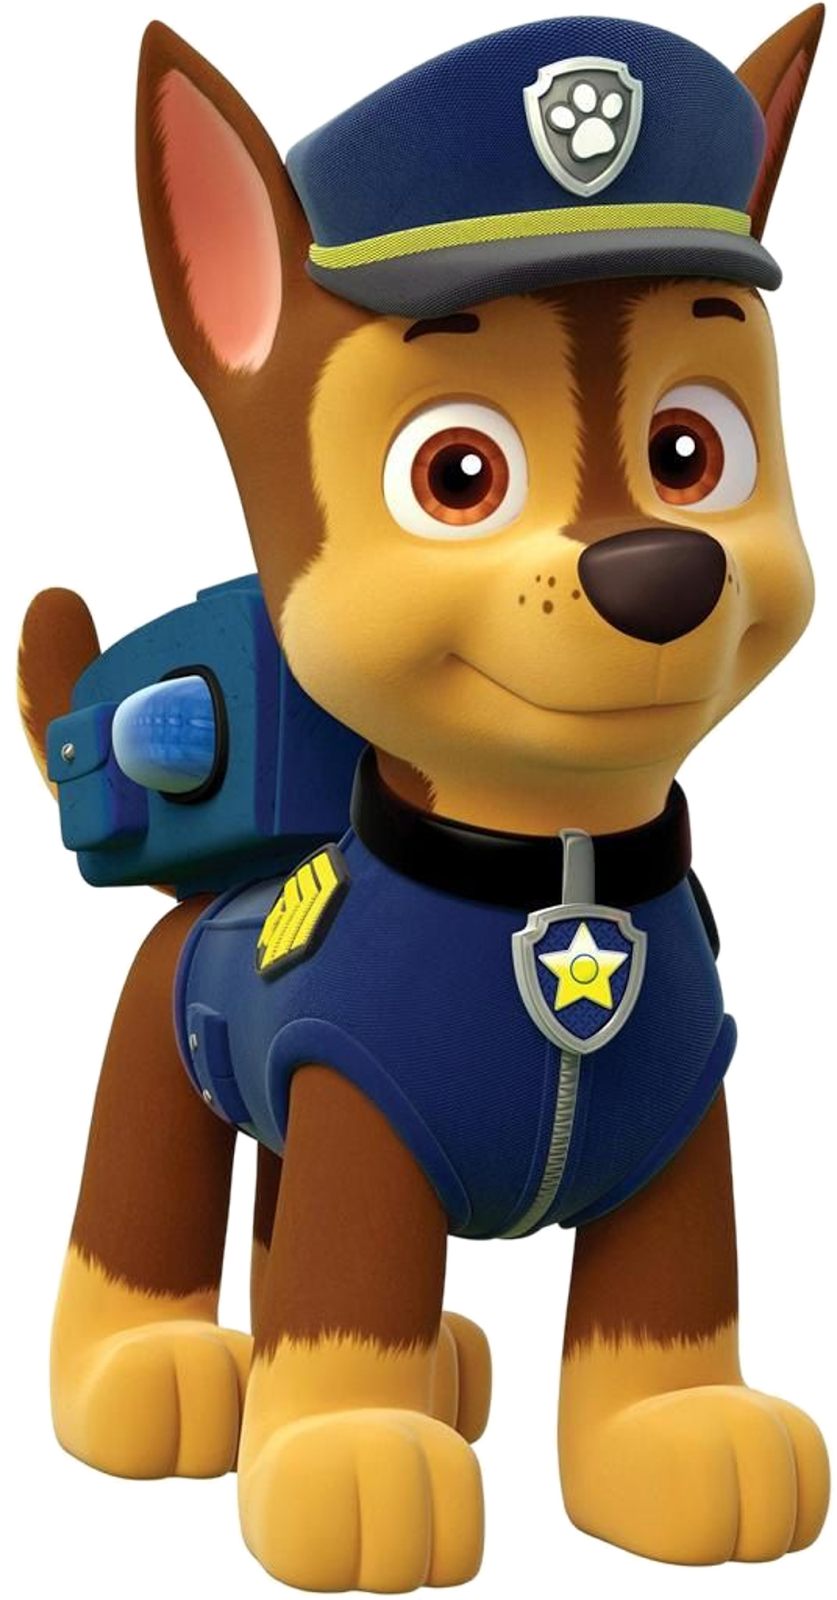 PAW Patrol PNG #41888 - Free Icons and PNG Backgrounds